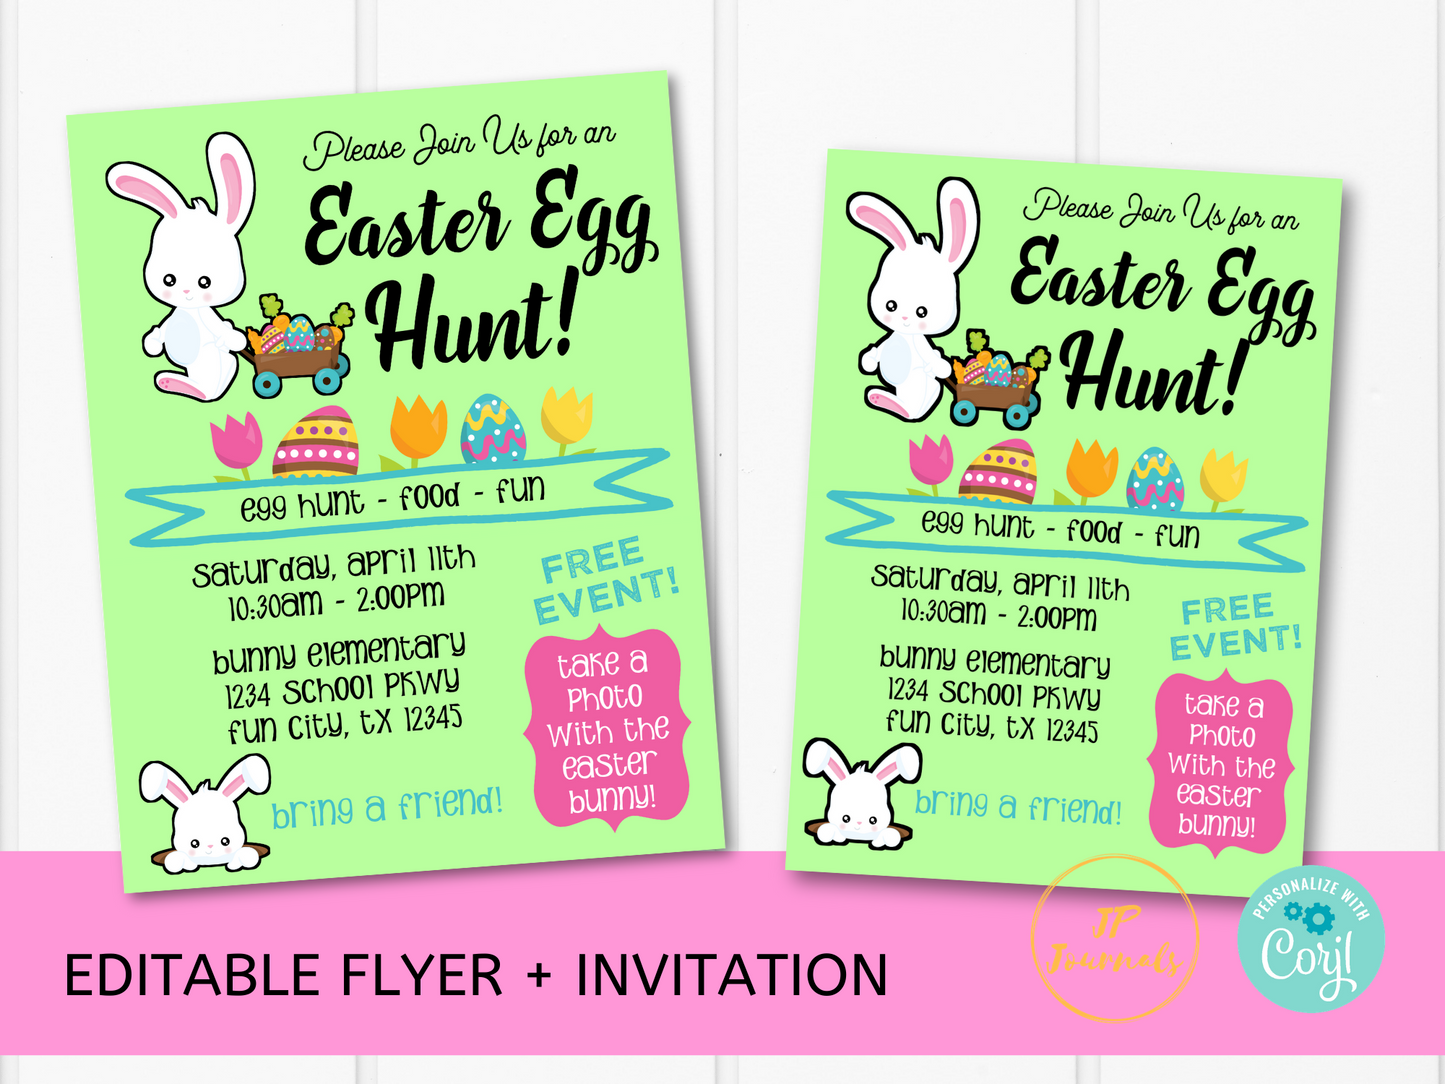 Easter Egg Hunt Invitation Template - Printable Invite and Flyer - Edit and Print DIY - Church HOA School Office Community Events